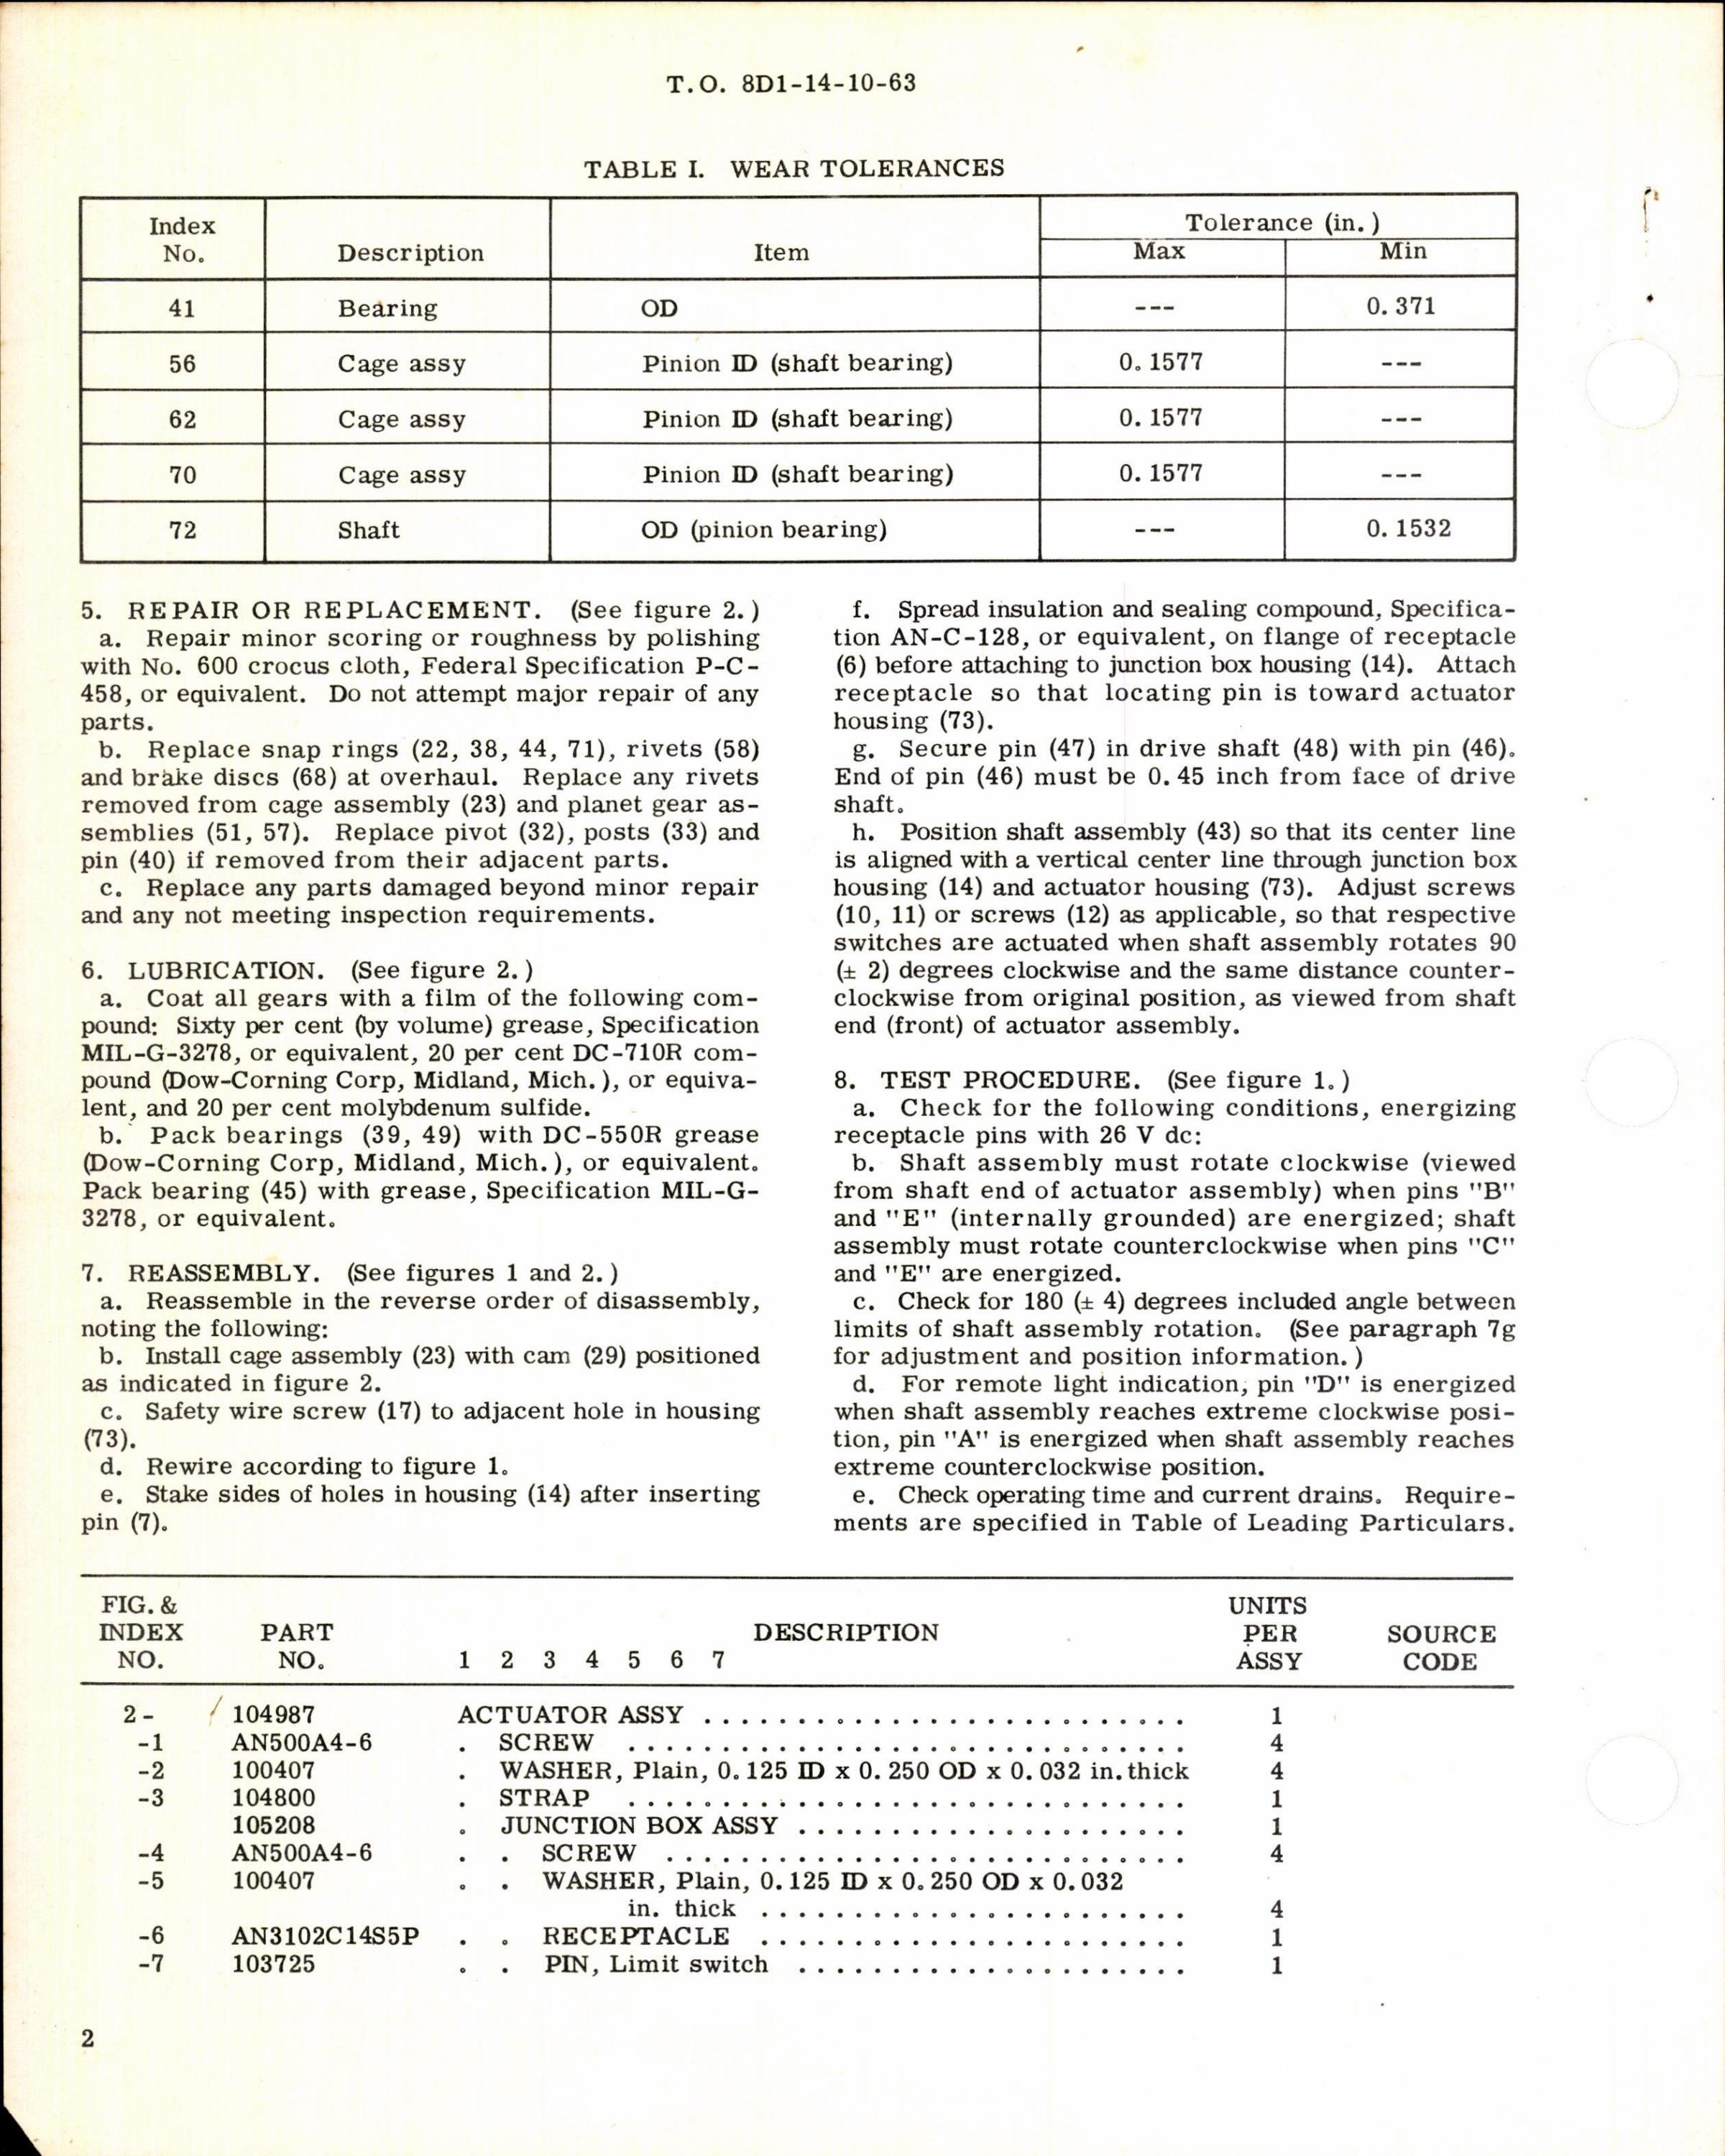 Sample page 2 from AirCorps Library document: Instructions w Parts Breakdown for Actuator Assembly Part 104987